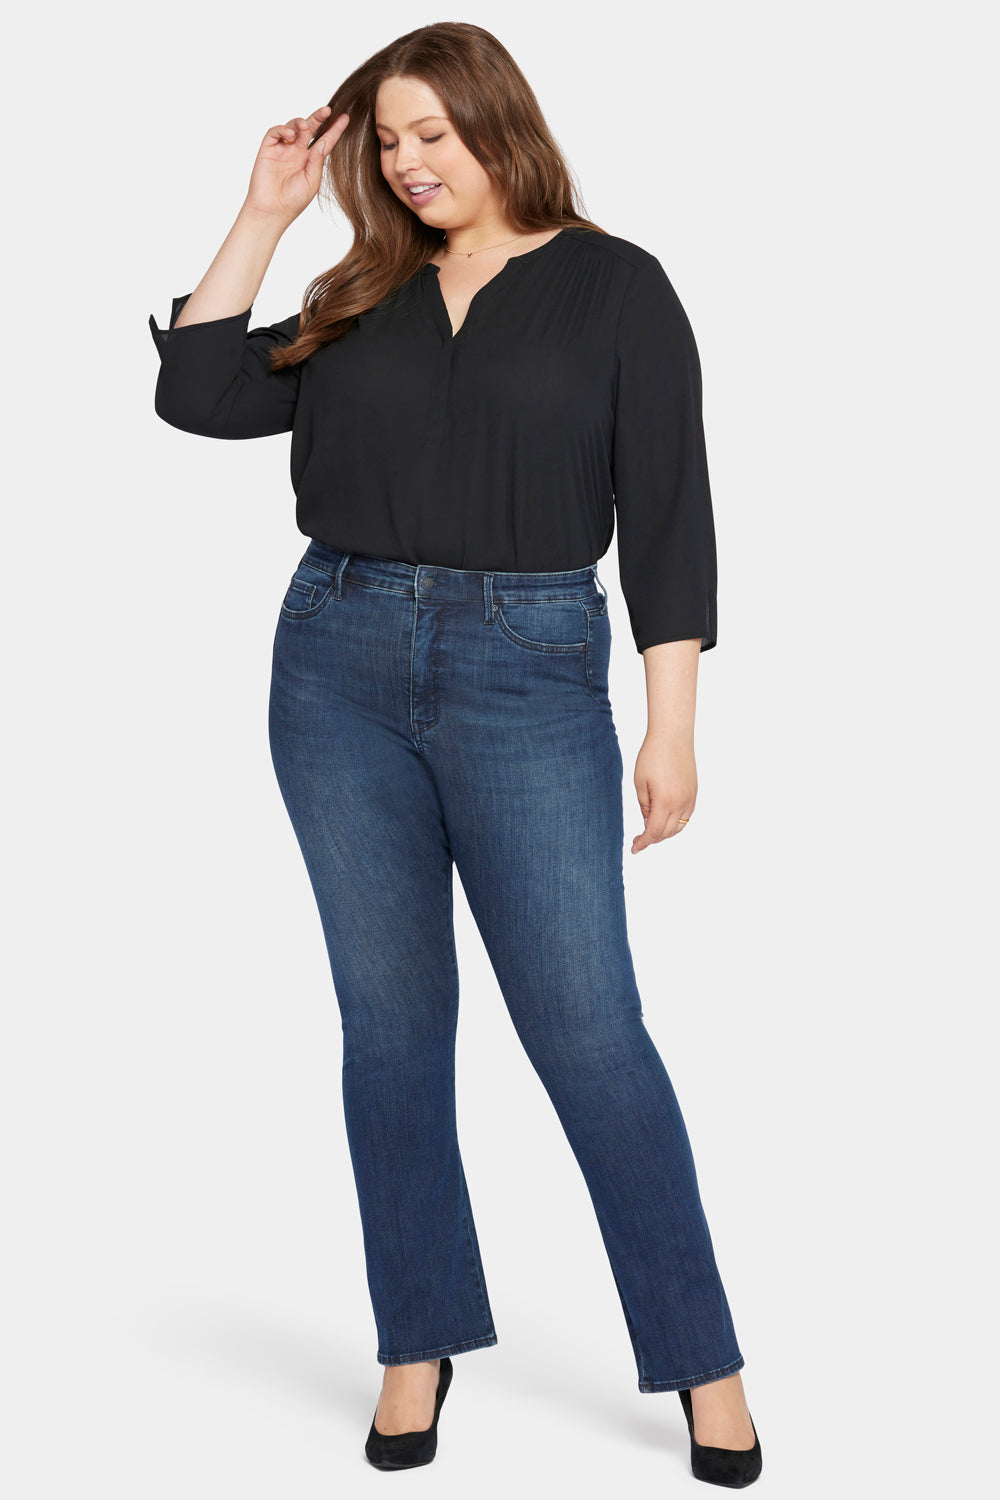 Le Silhouette Slim Bootcut Jeans In Long Inseam Plus Size With